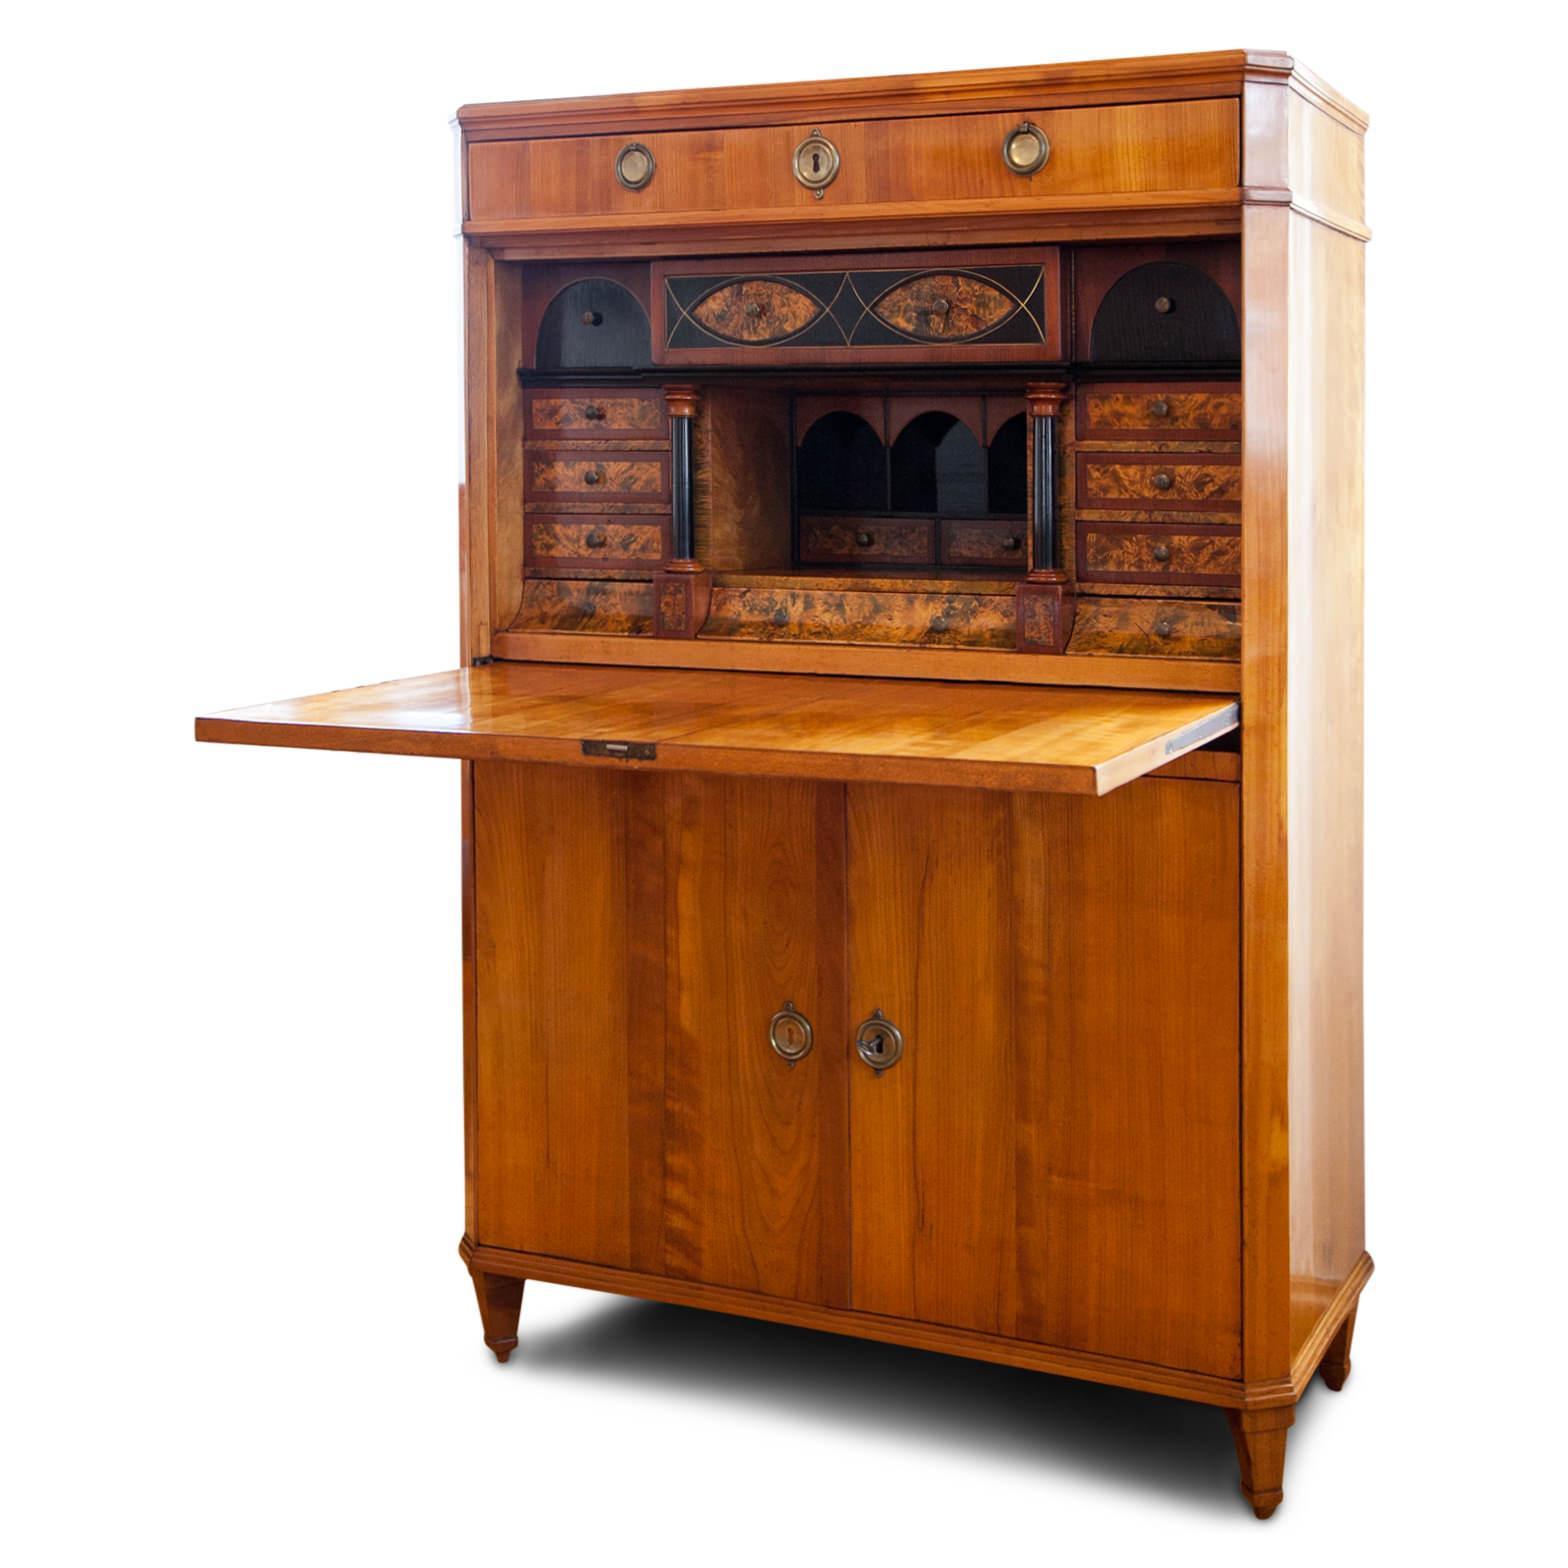 Secretaire of the early Biedermeier, circa 1810, with a two-doored base and a smooth exterior with one top shelf. The interior is beautifully veneered with burl wood and shows partly ebonized columns. Unrestored condition.